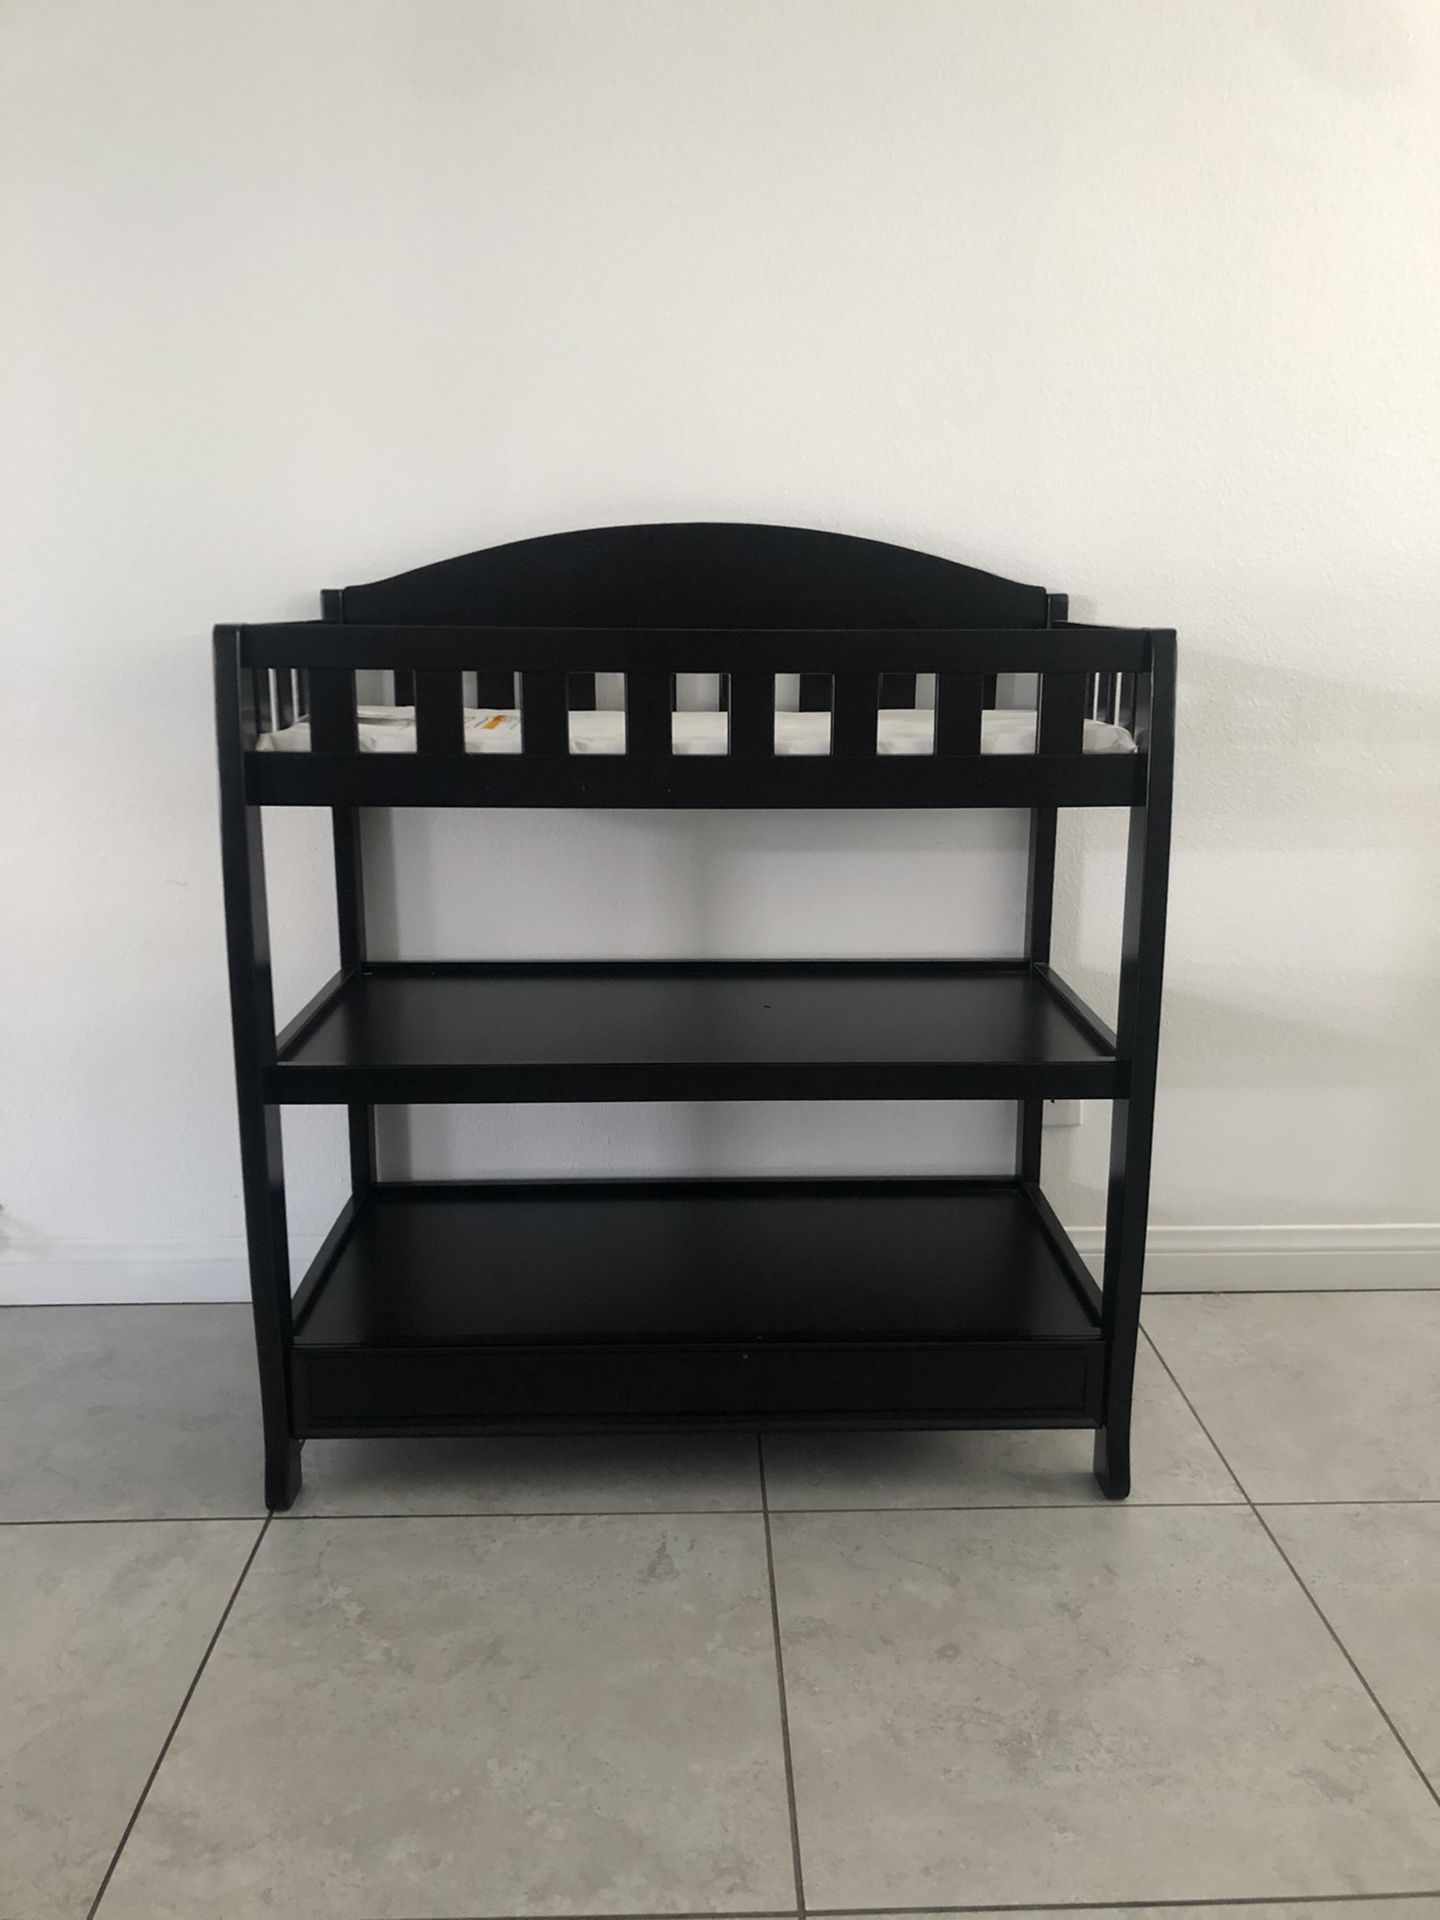 Brand new black changing table with pad